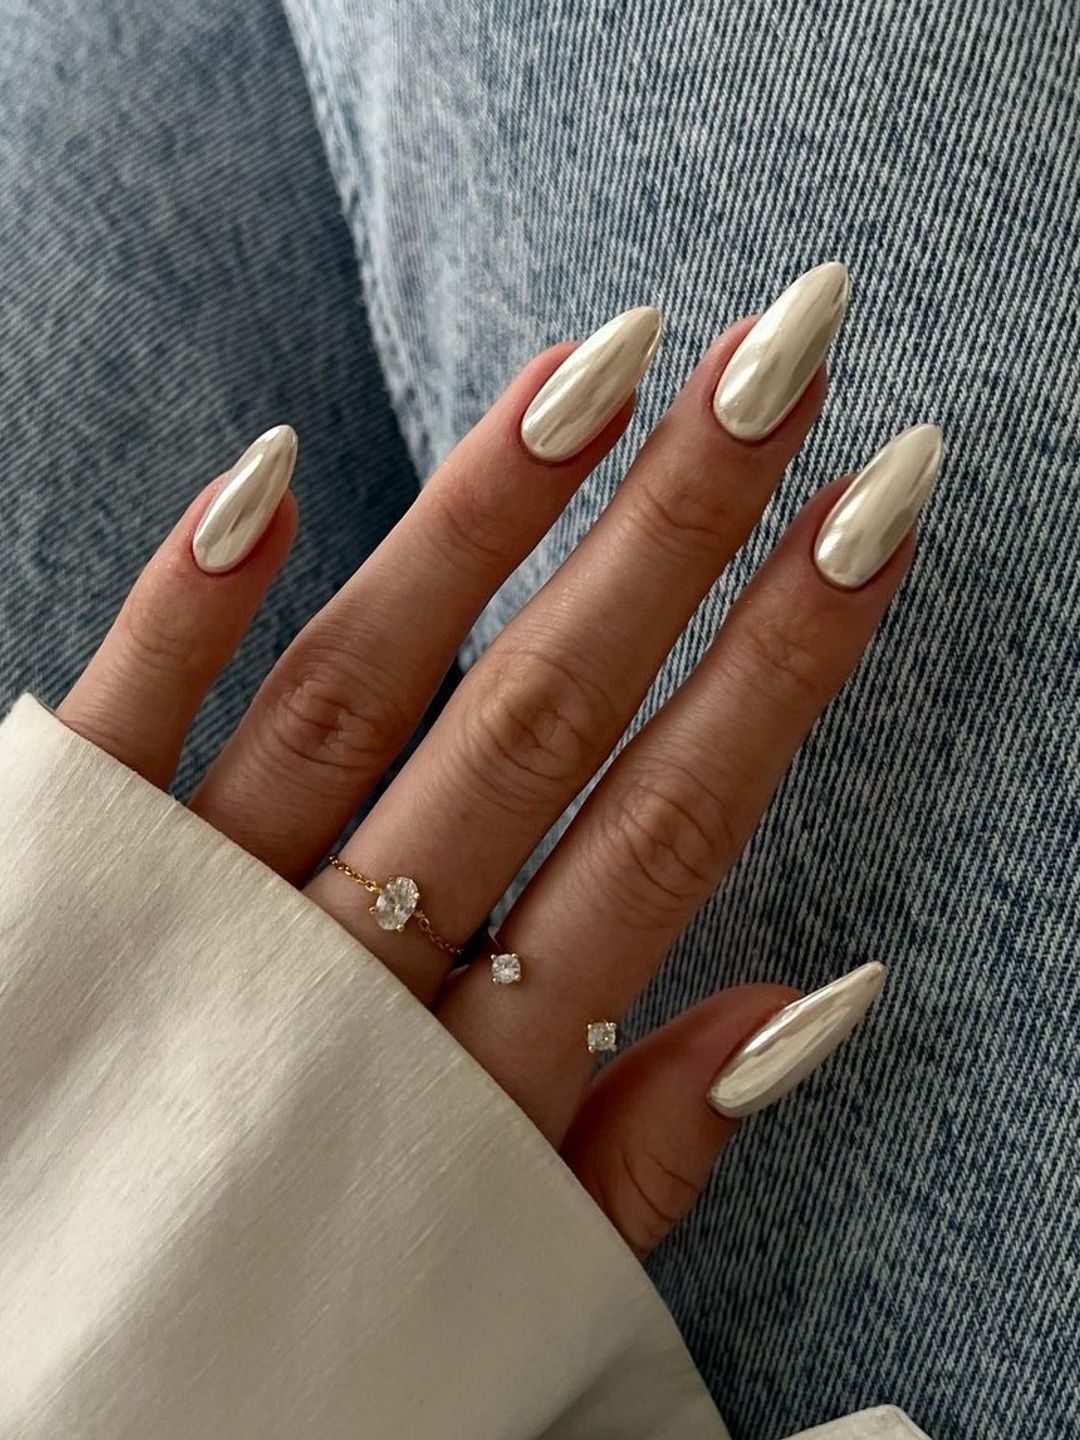 Vanilla Chrome is a great way to elevate the butter nails trend 